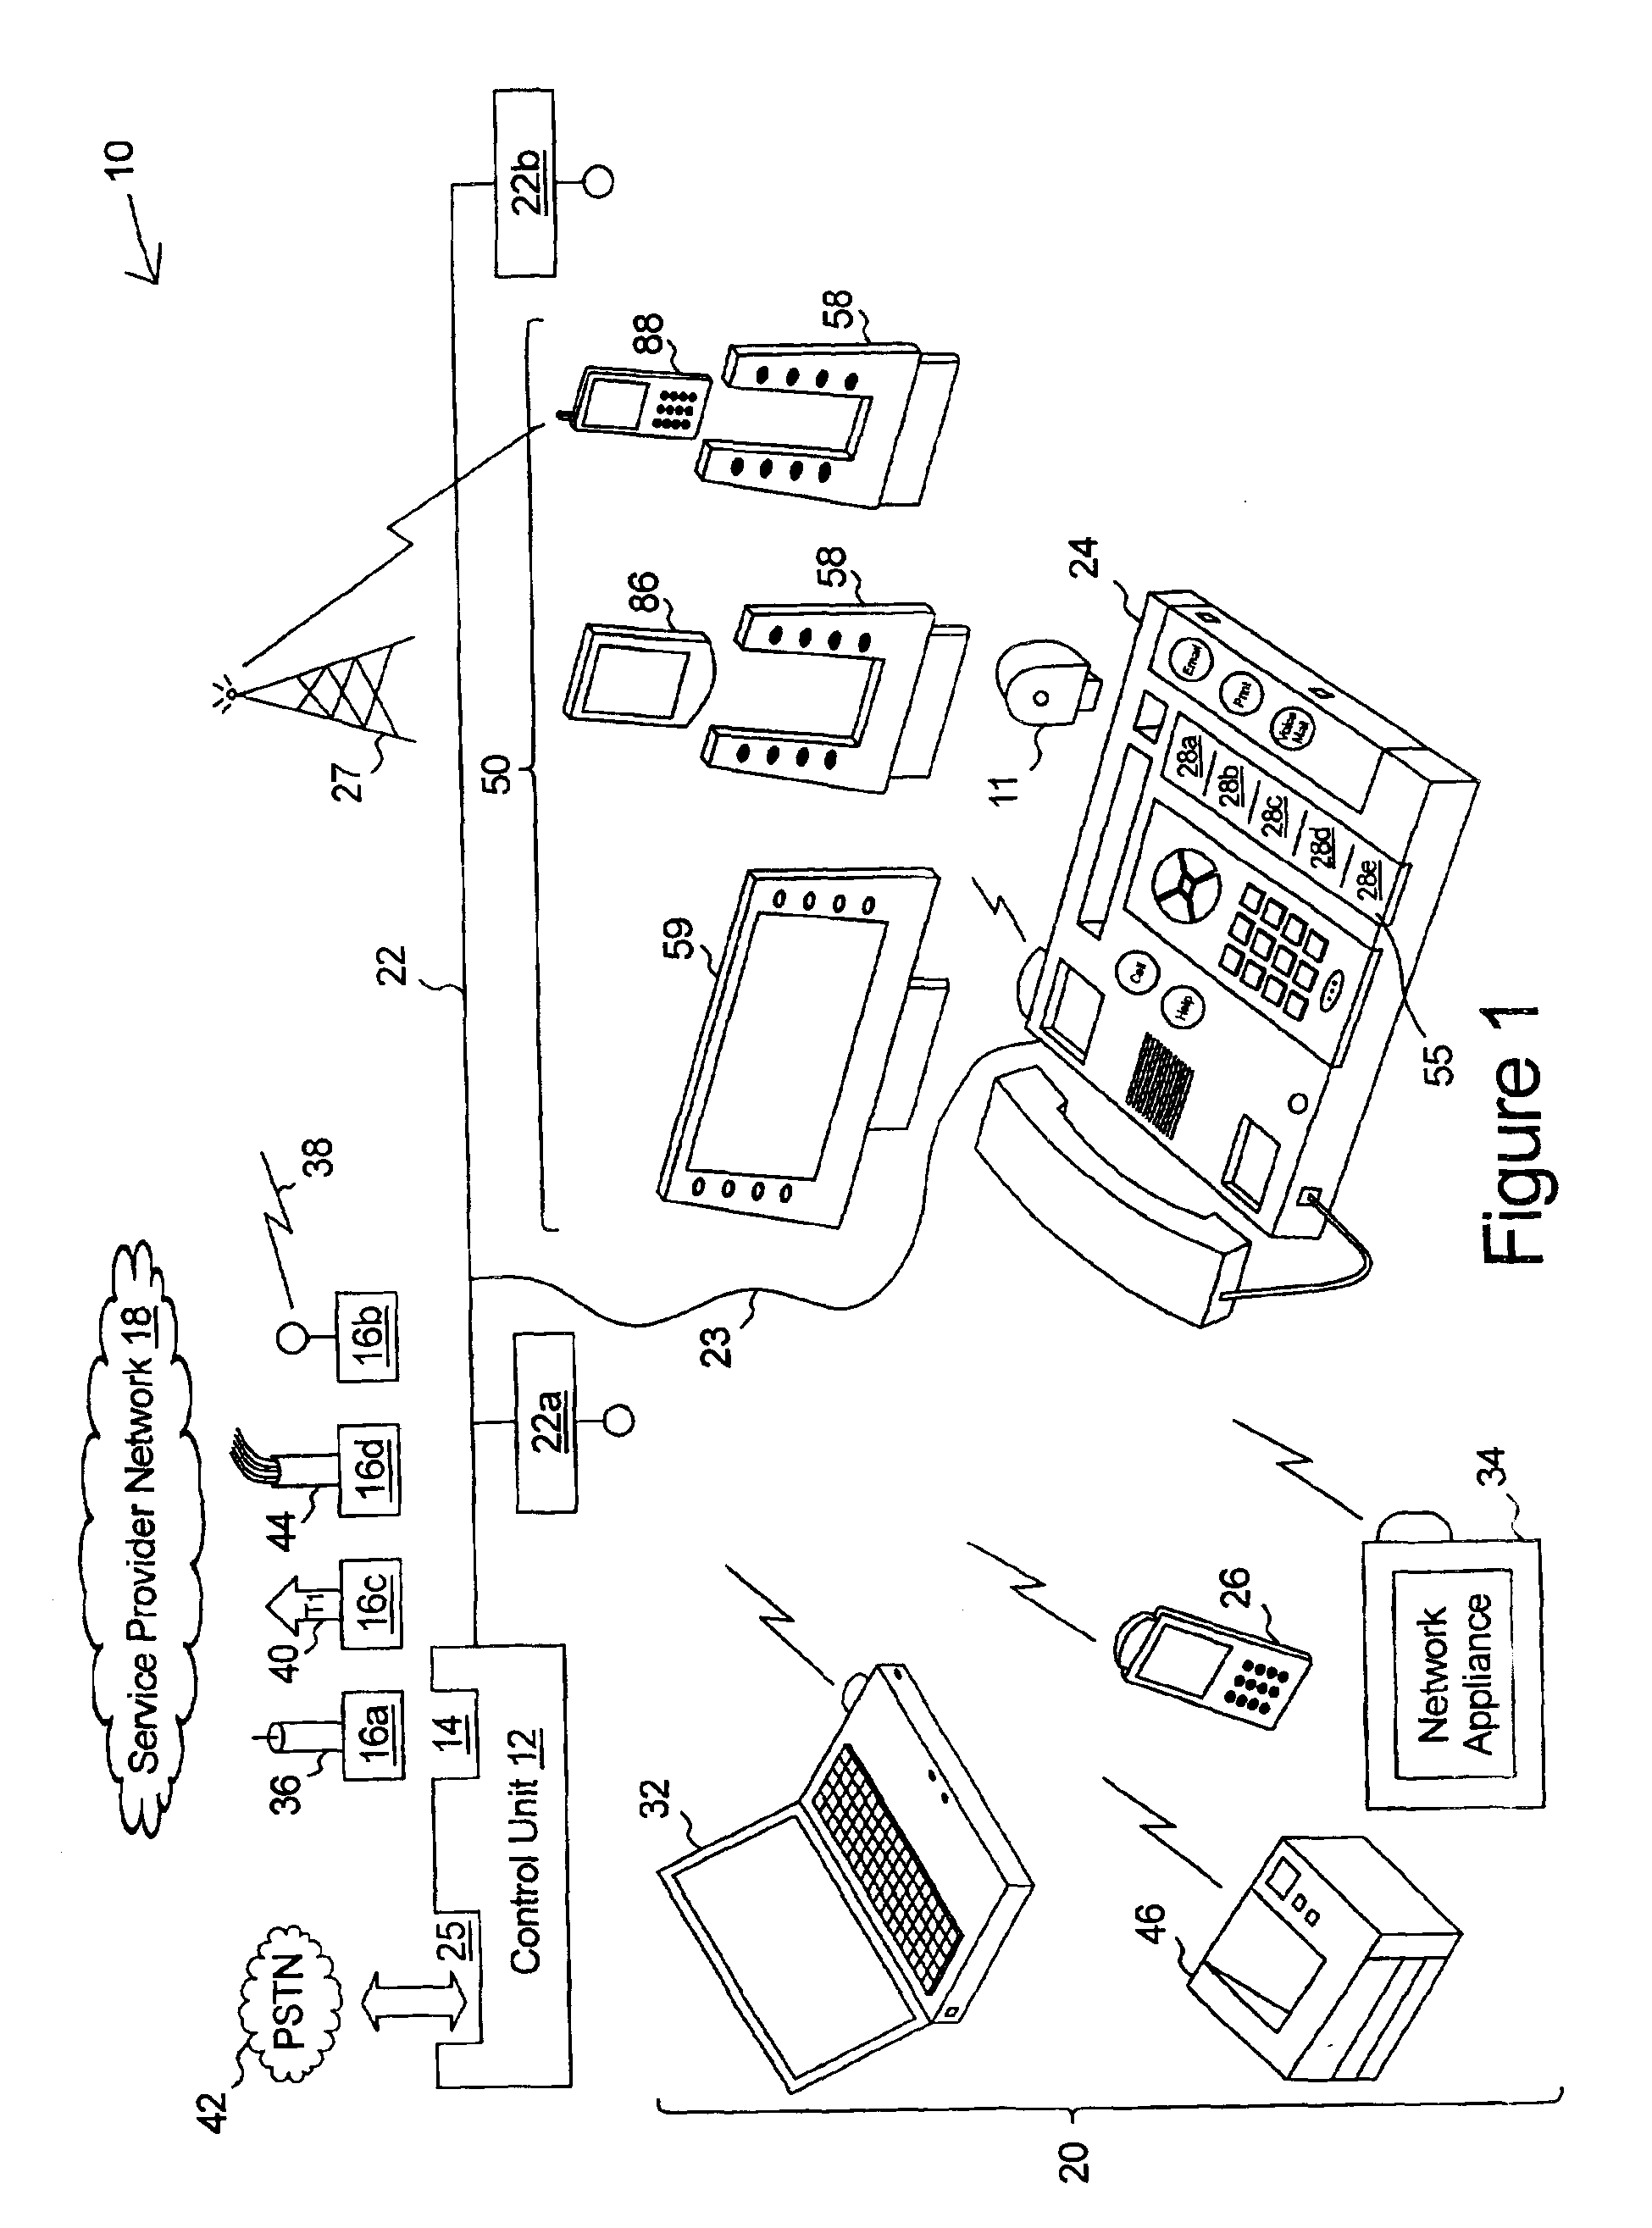 Multi-media communication system having programmable speed dial control indicia